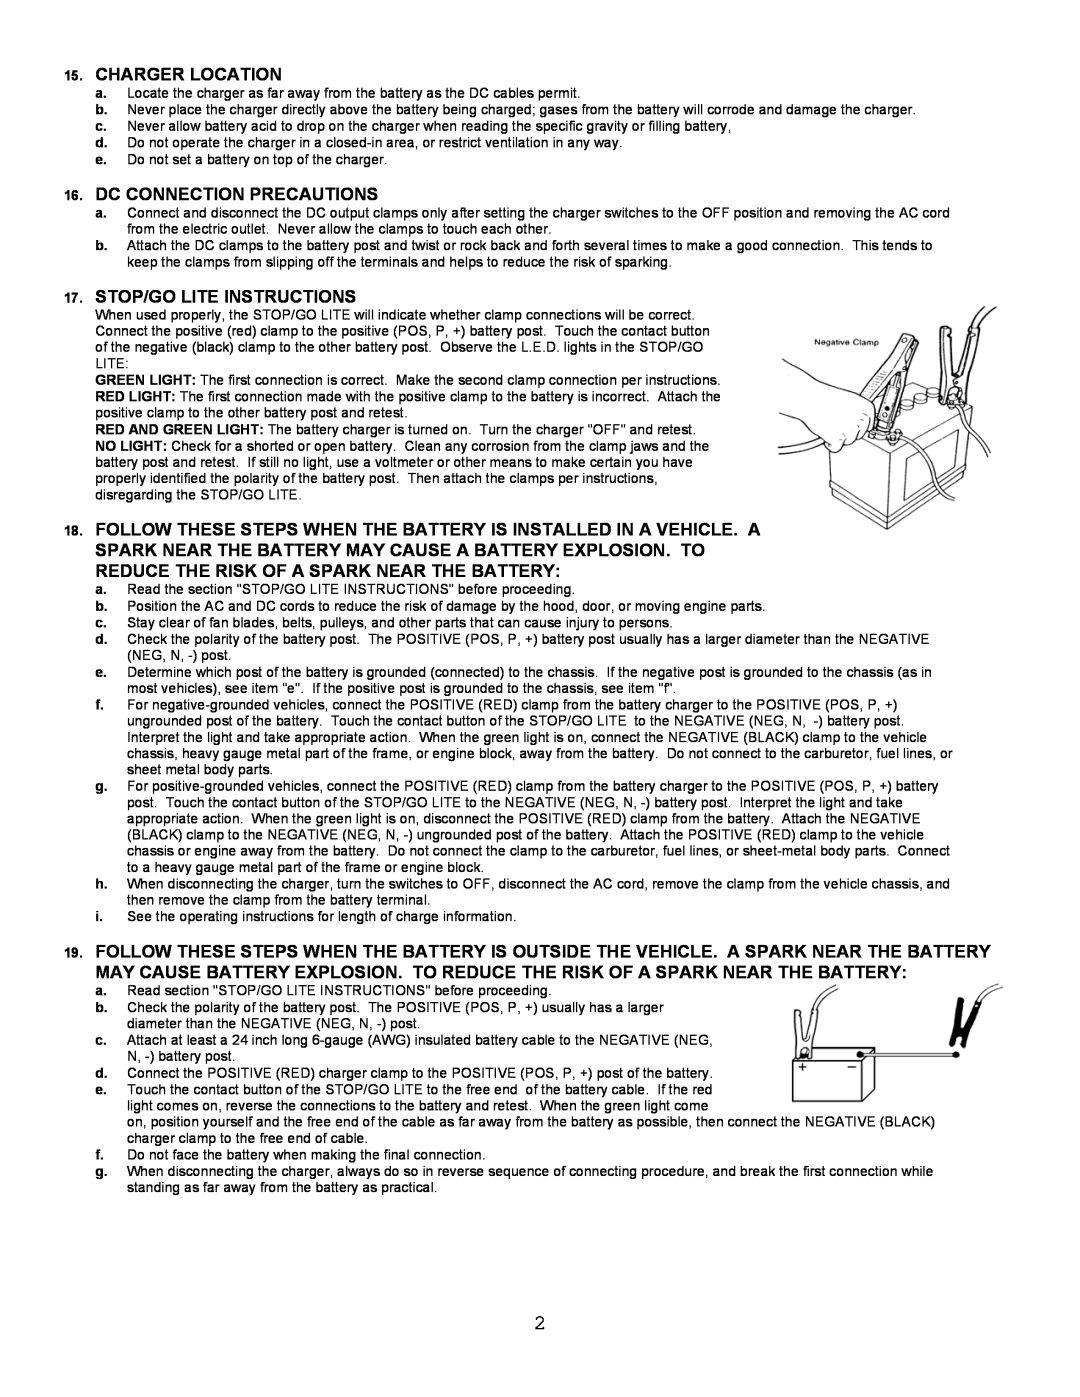 Atec BC-91009 manual Charger Location, Dc Connection Precautions, Stop/Go Lite Instructions 